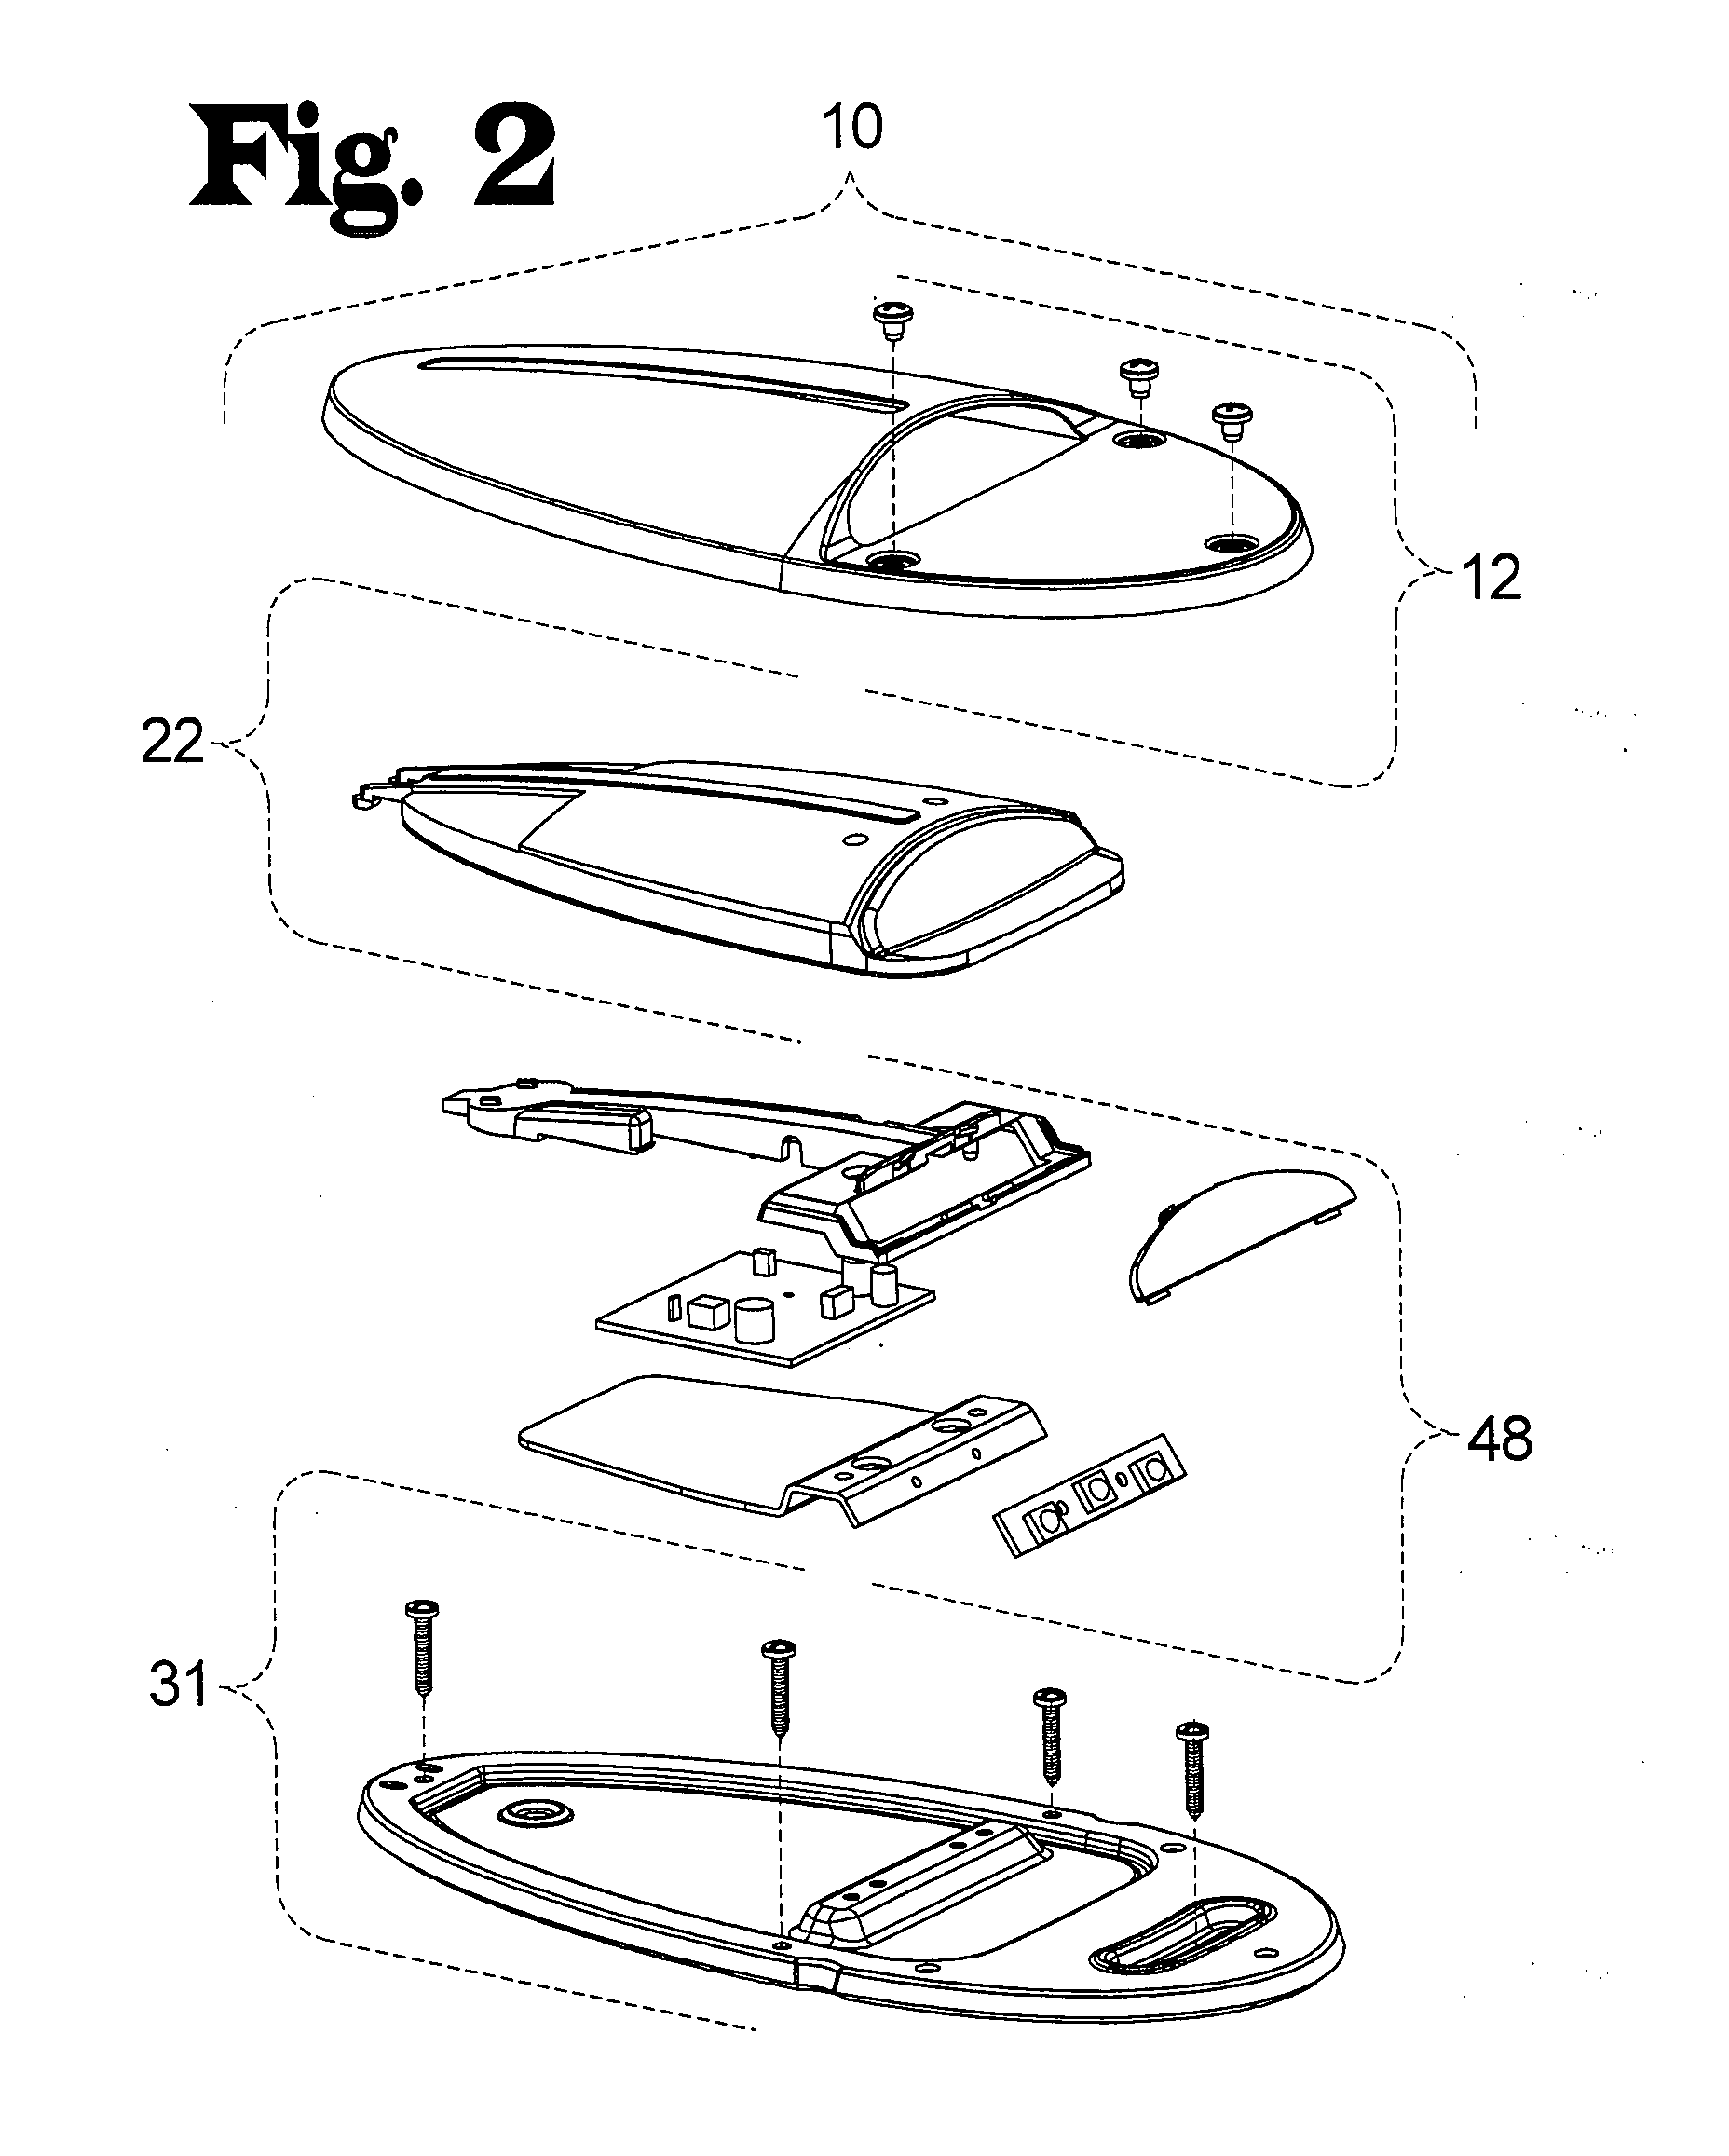 Non-invasive high intensity LED docking light and method for mounting